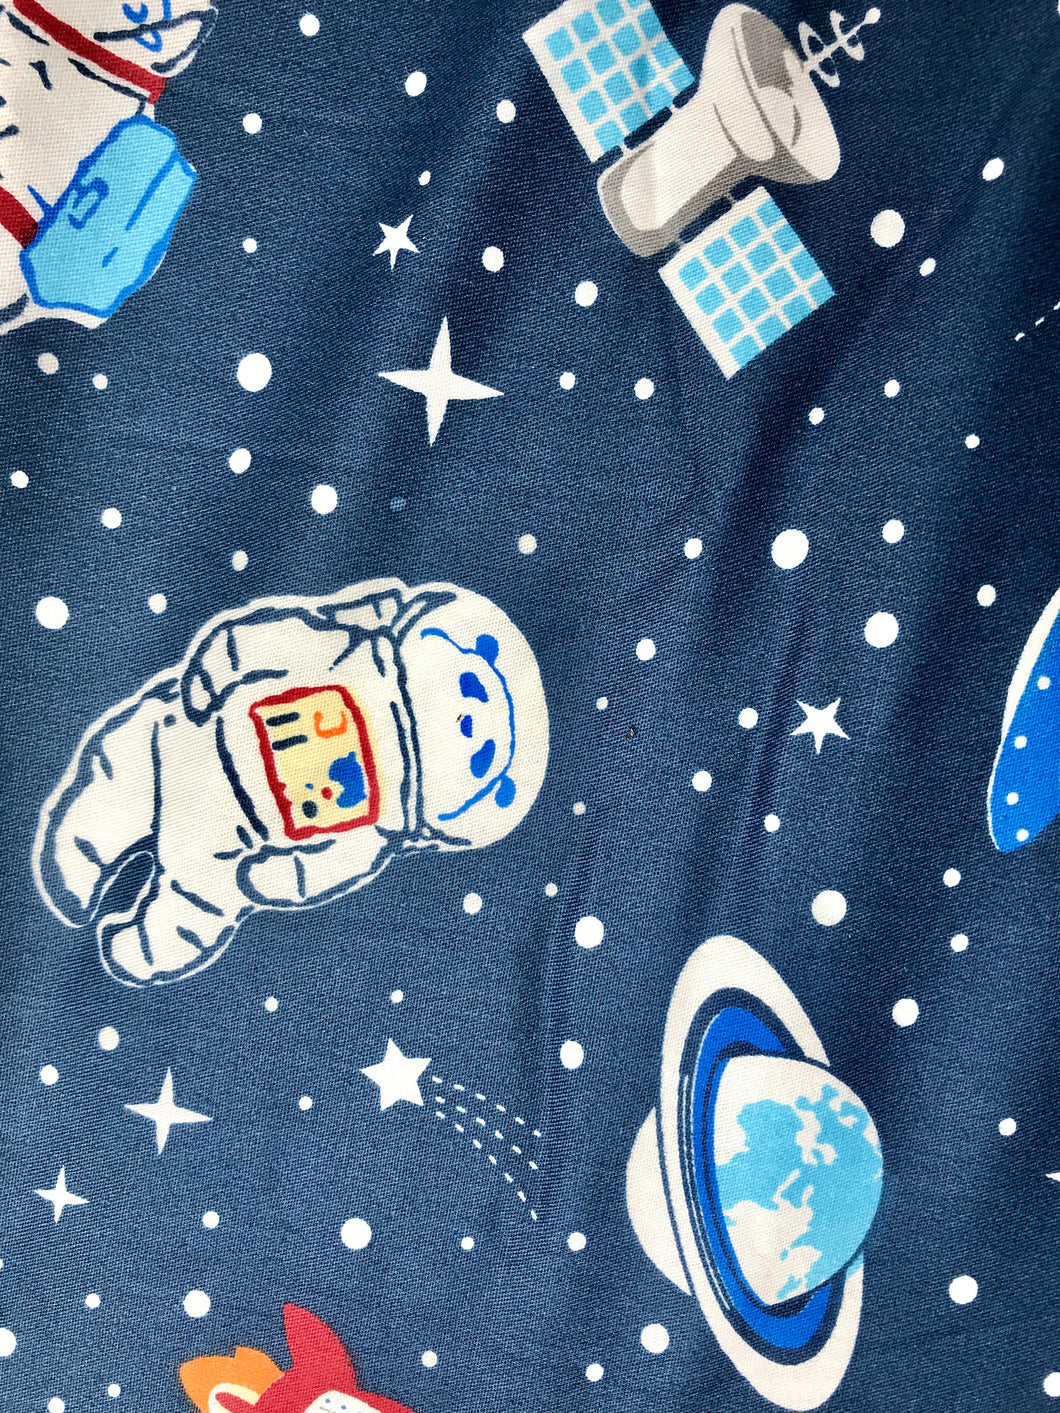 Space Bear Printed Cotton Fabric